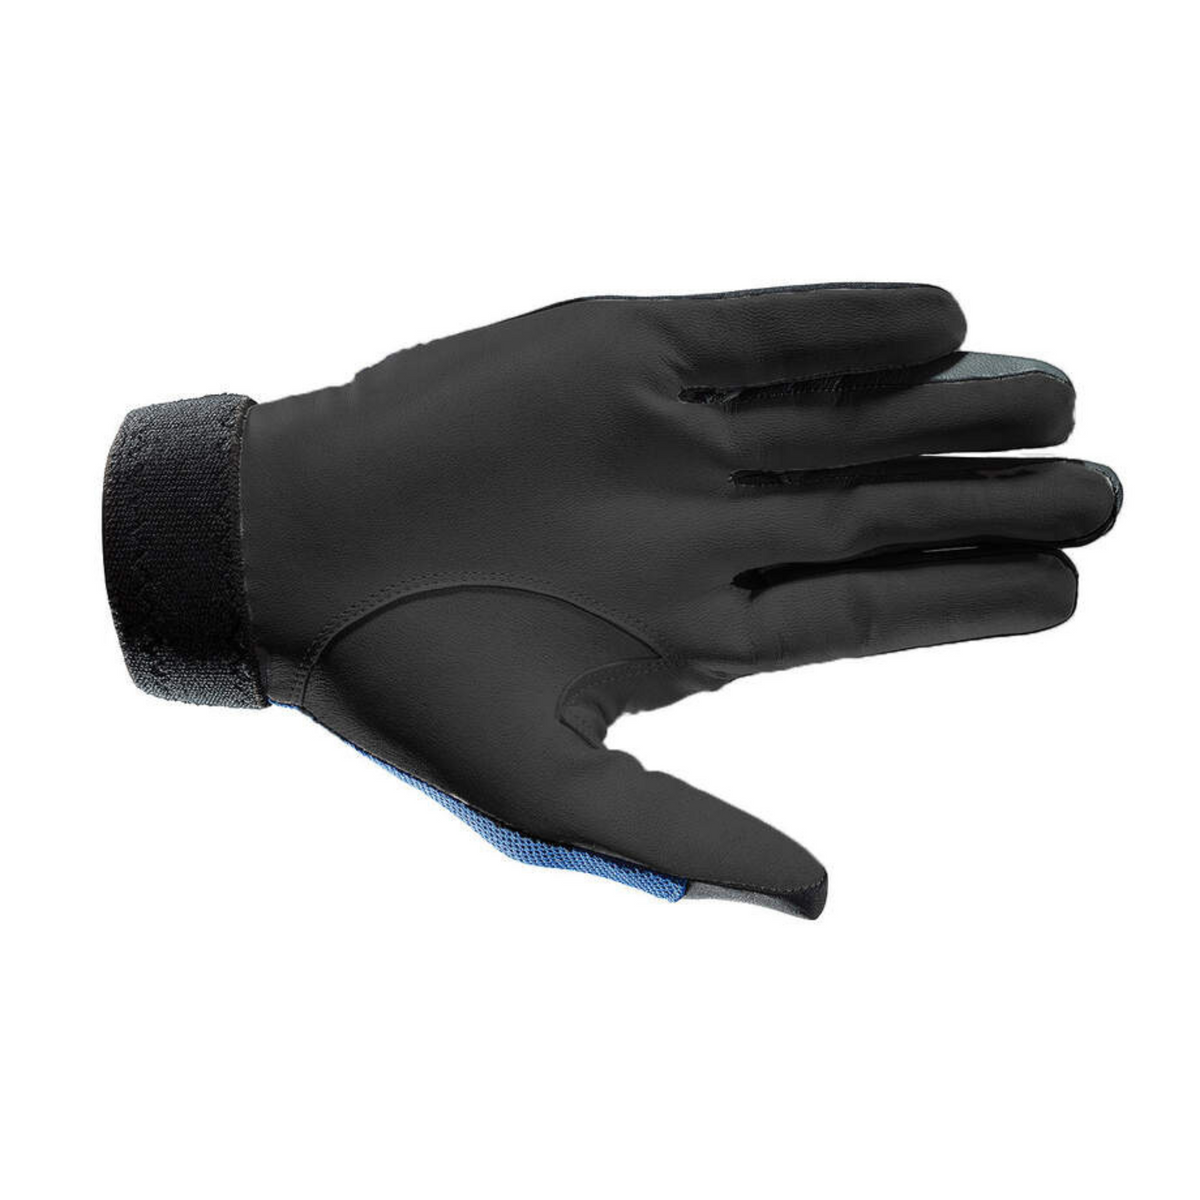 Sensation Glove for Padel and Pickleball Racquet Paddle Sports